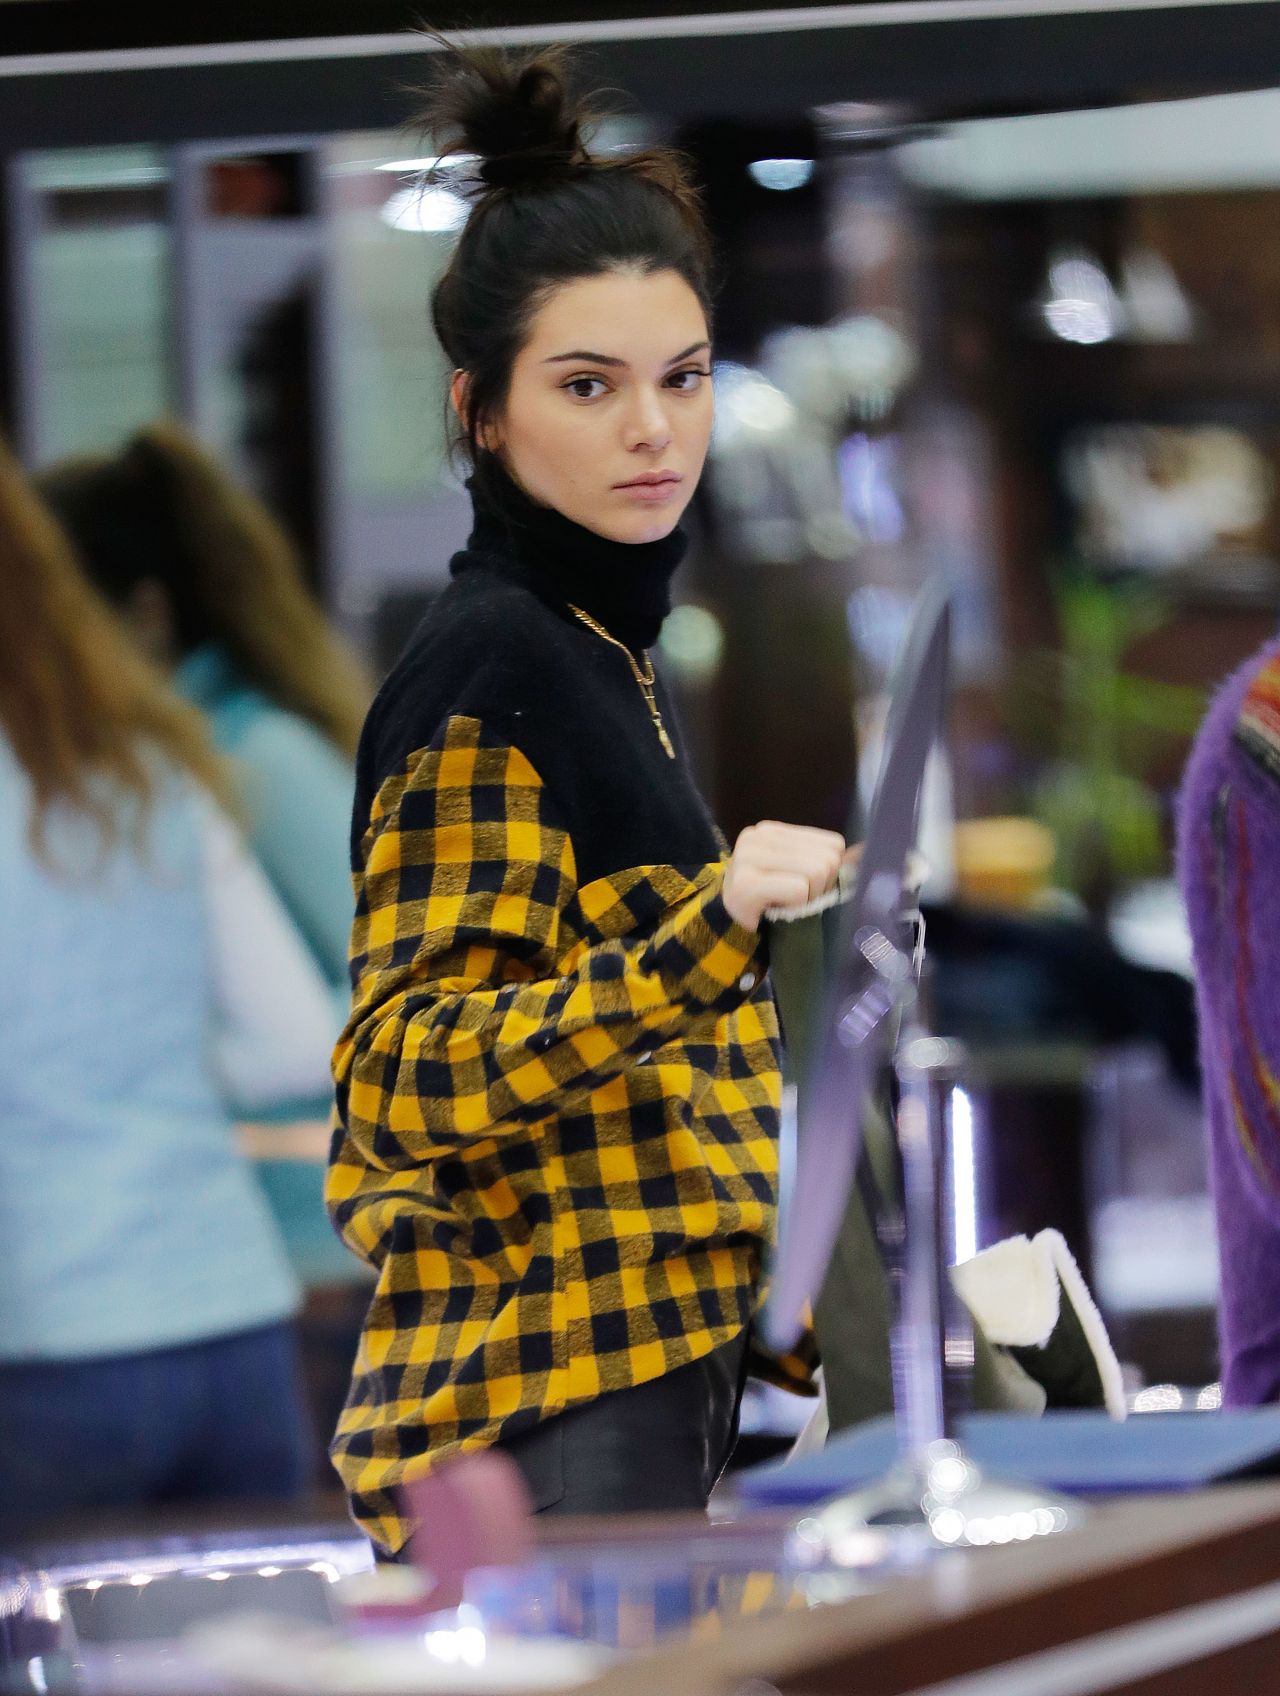 Kendall shopping in NYC